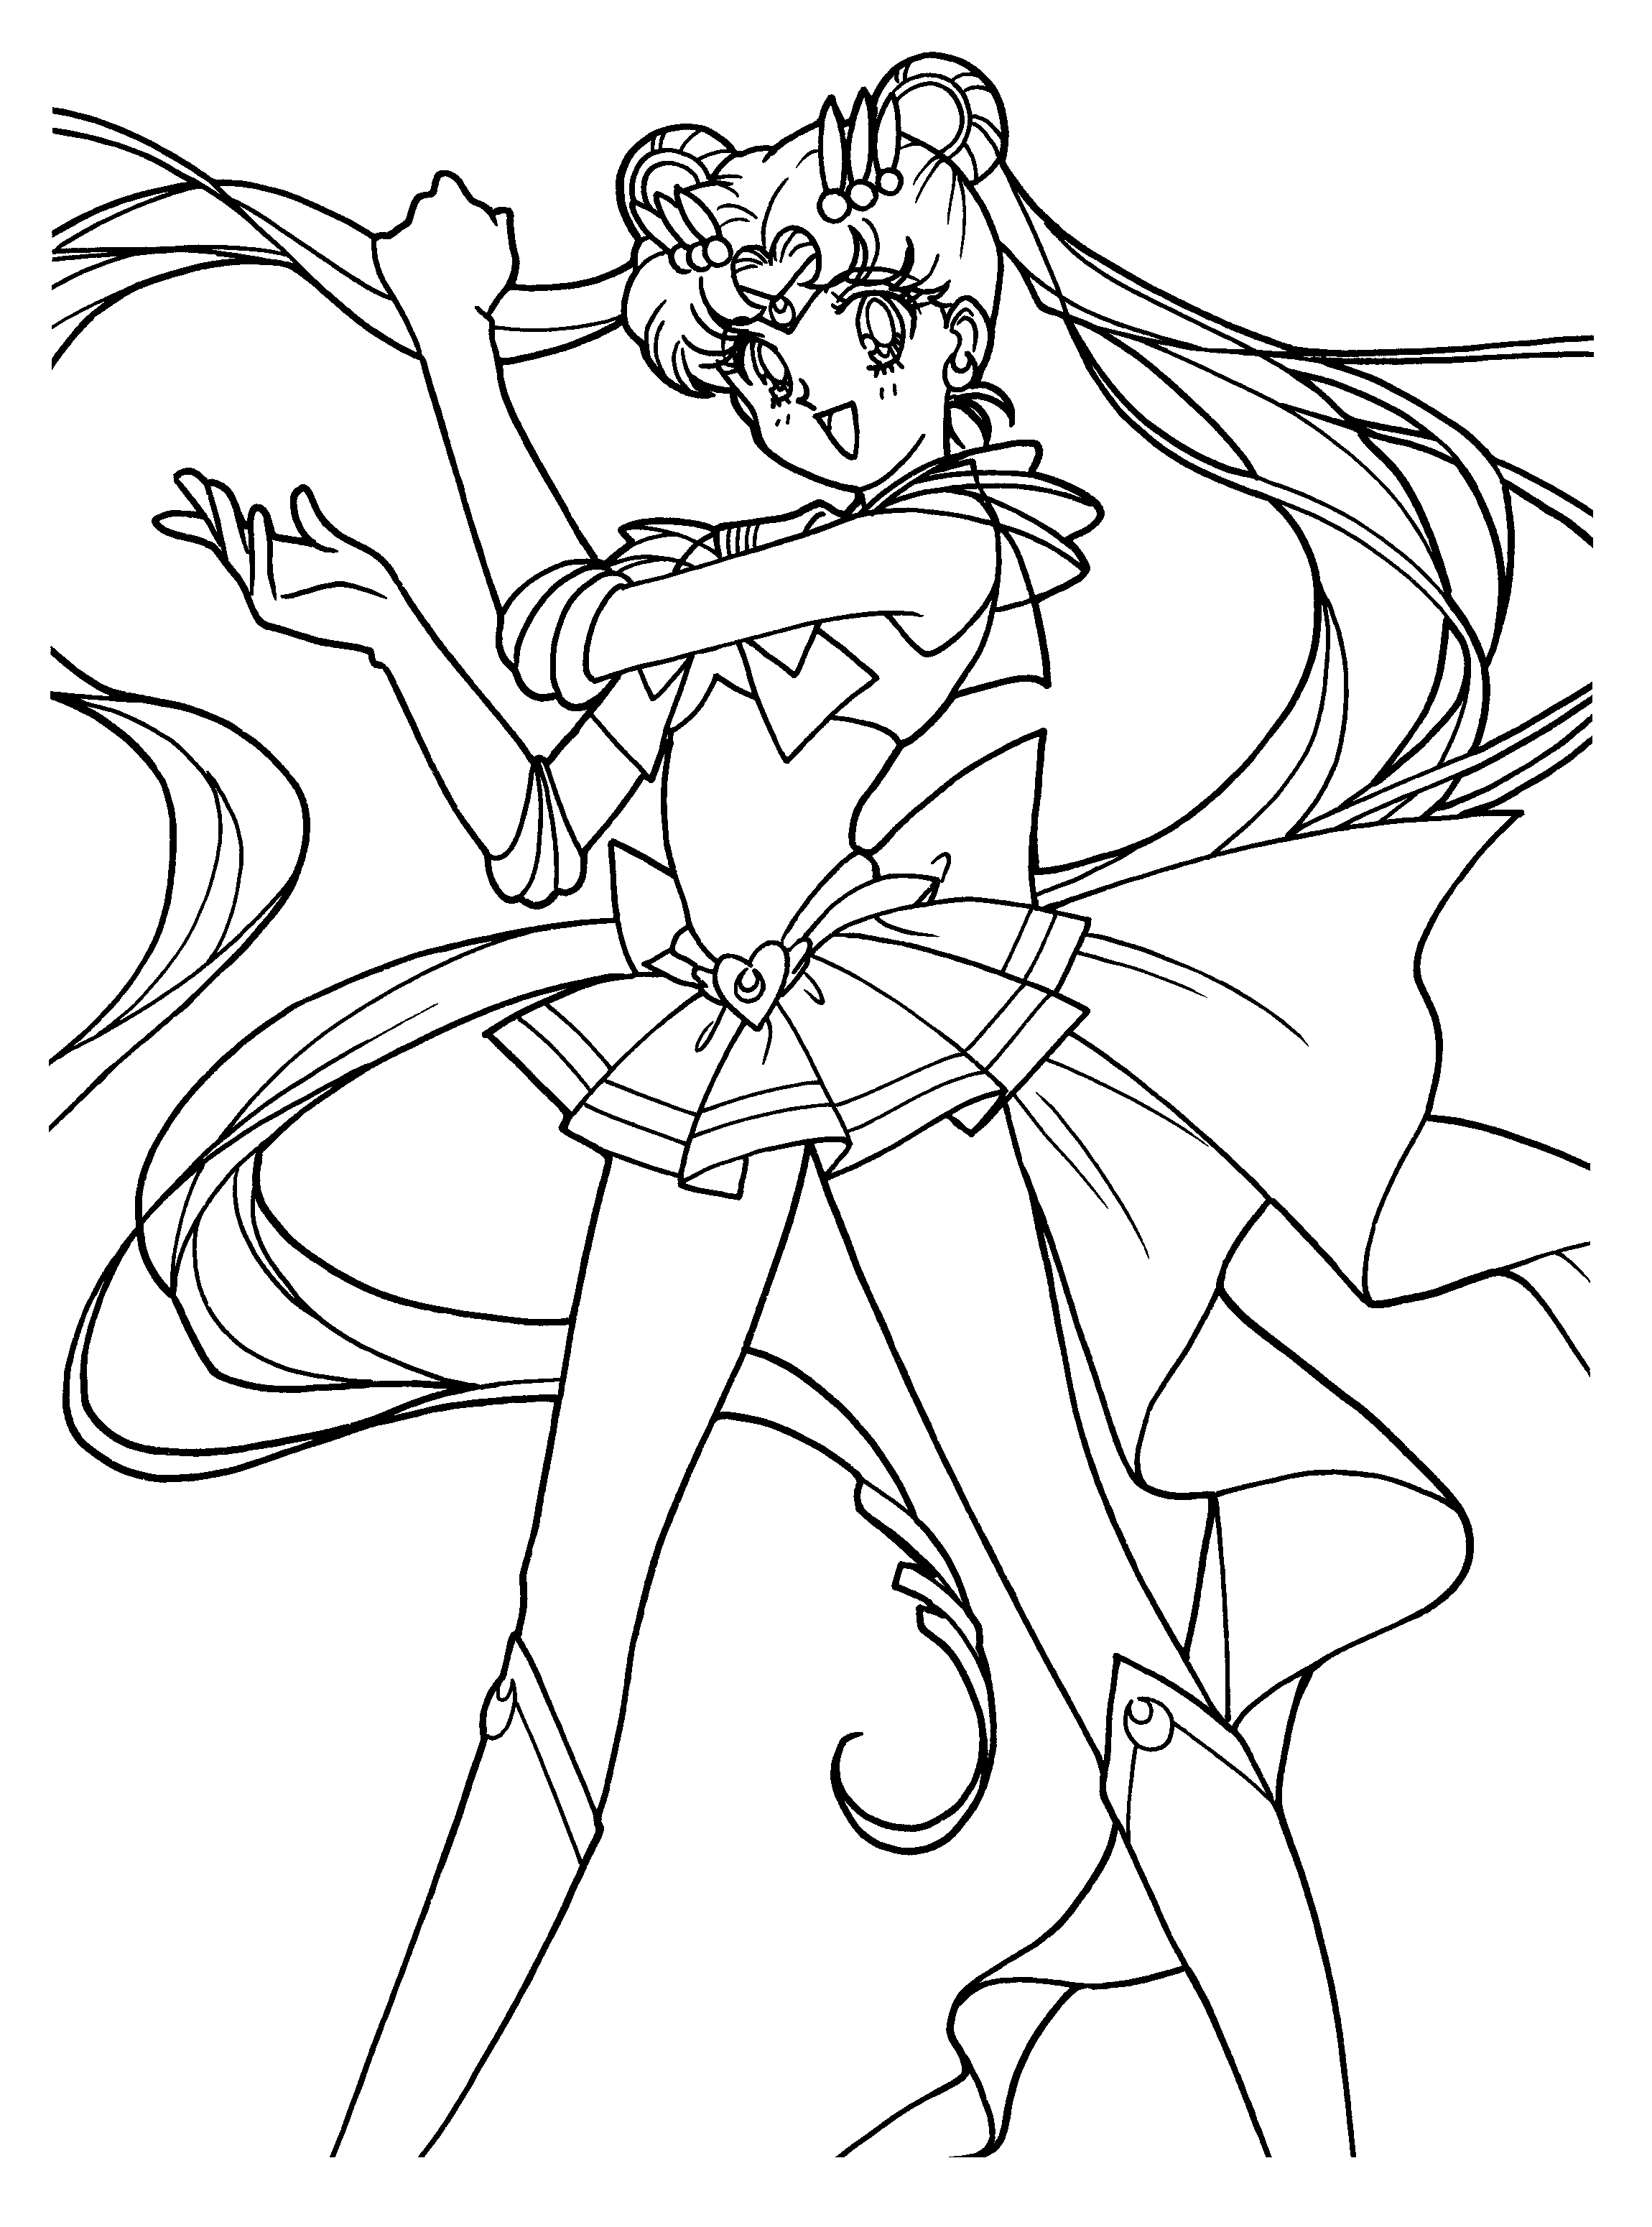 Sailor Moon Black and White Logo - Coloring Pages Sailor Moon GIFs